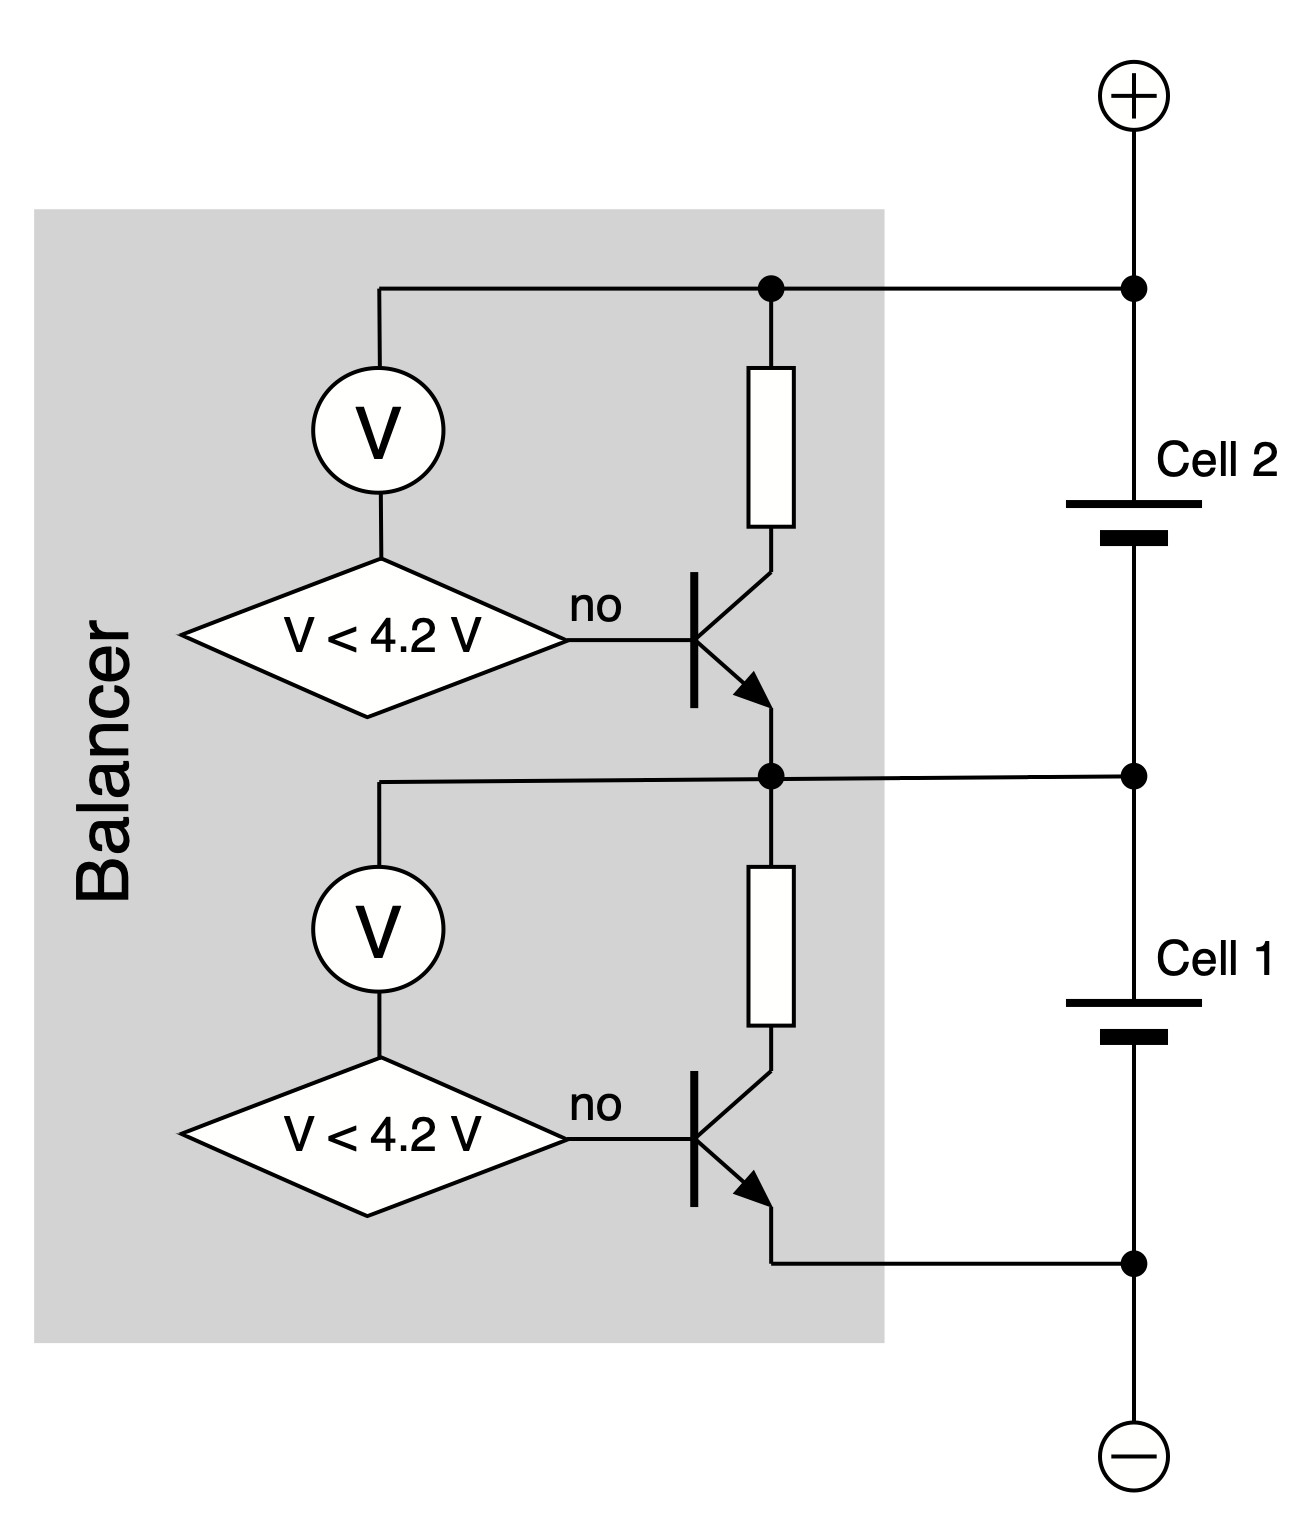 Simple balancer for two cells